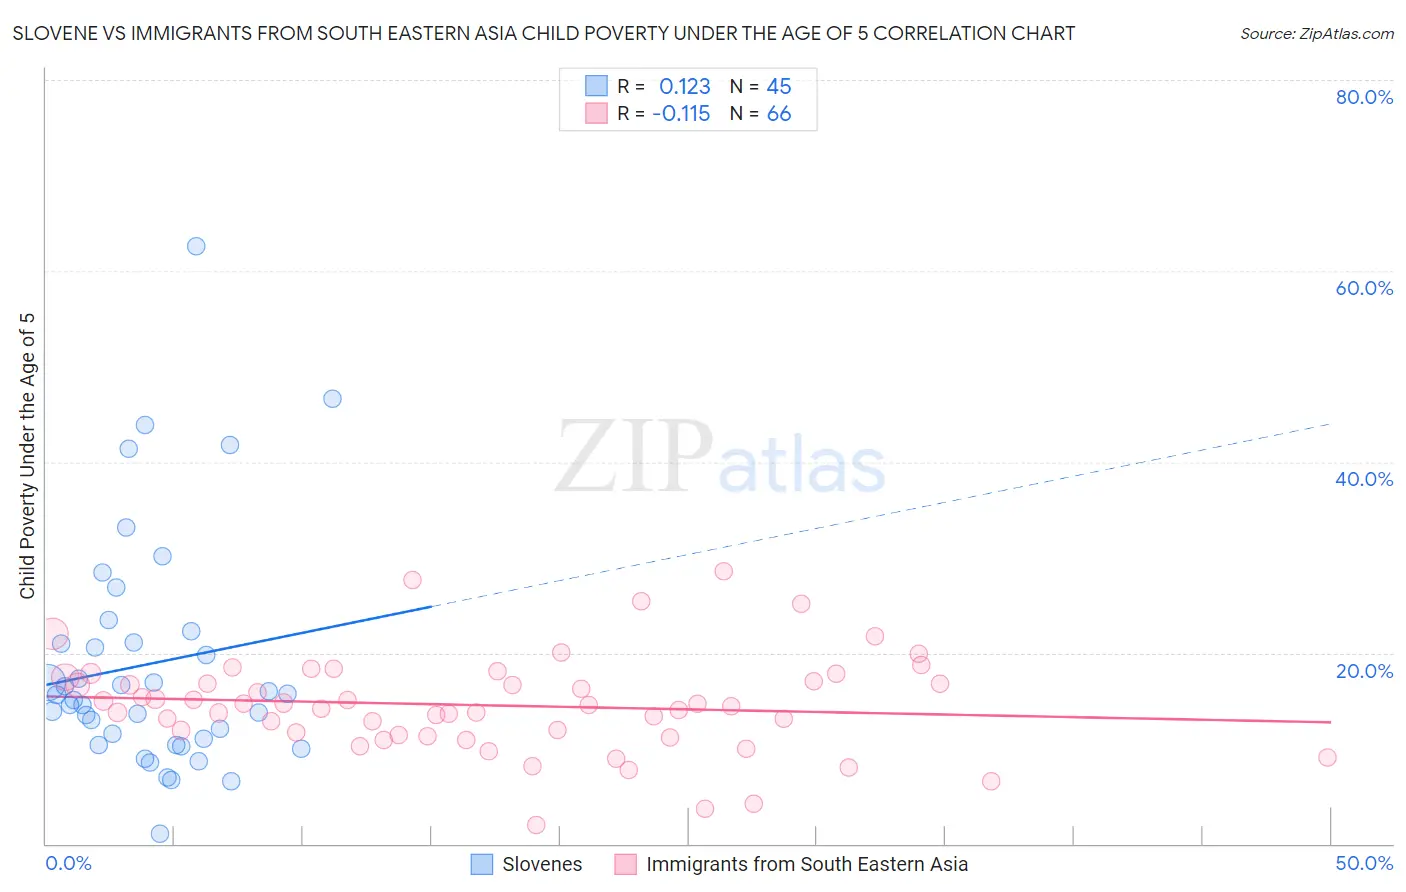 Slovene vs Immigrants from South Eastern Asia Child Poverty Under the Age of 5